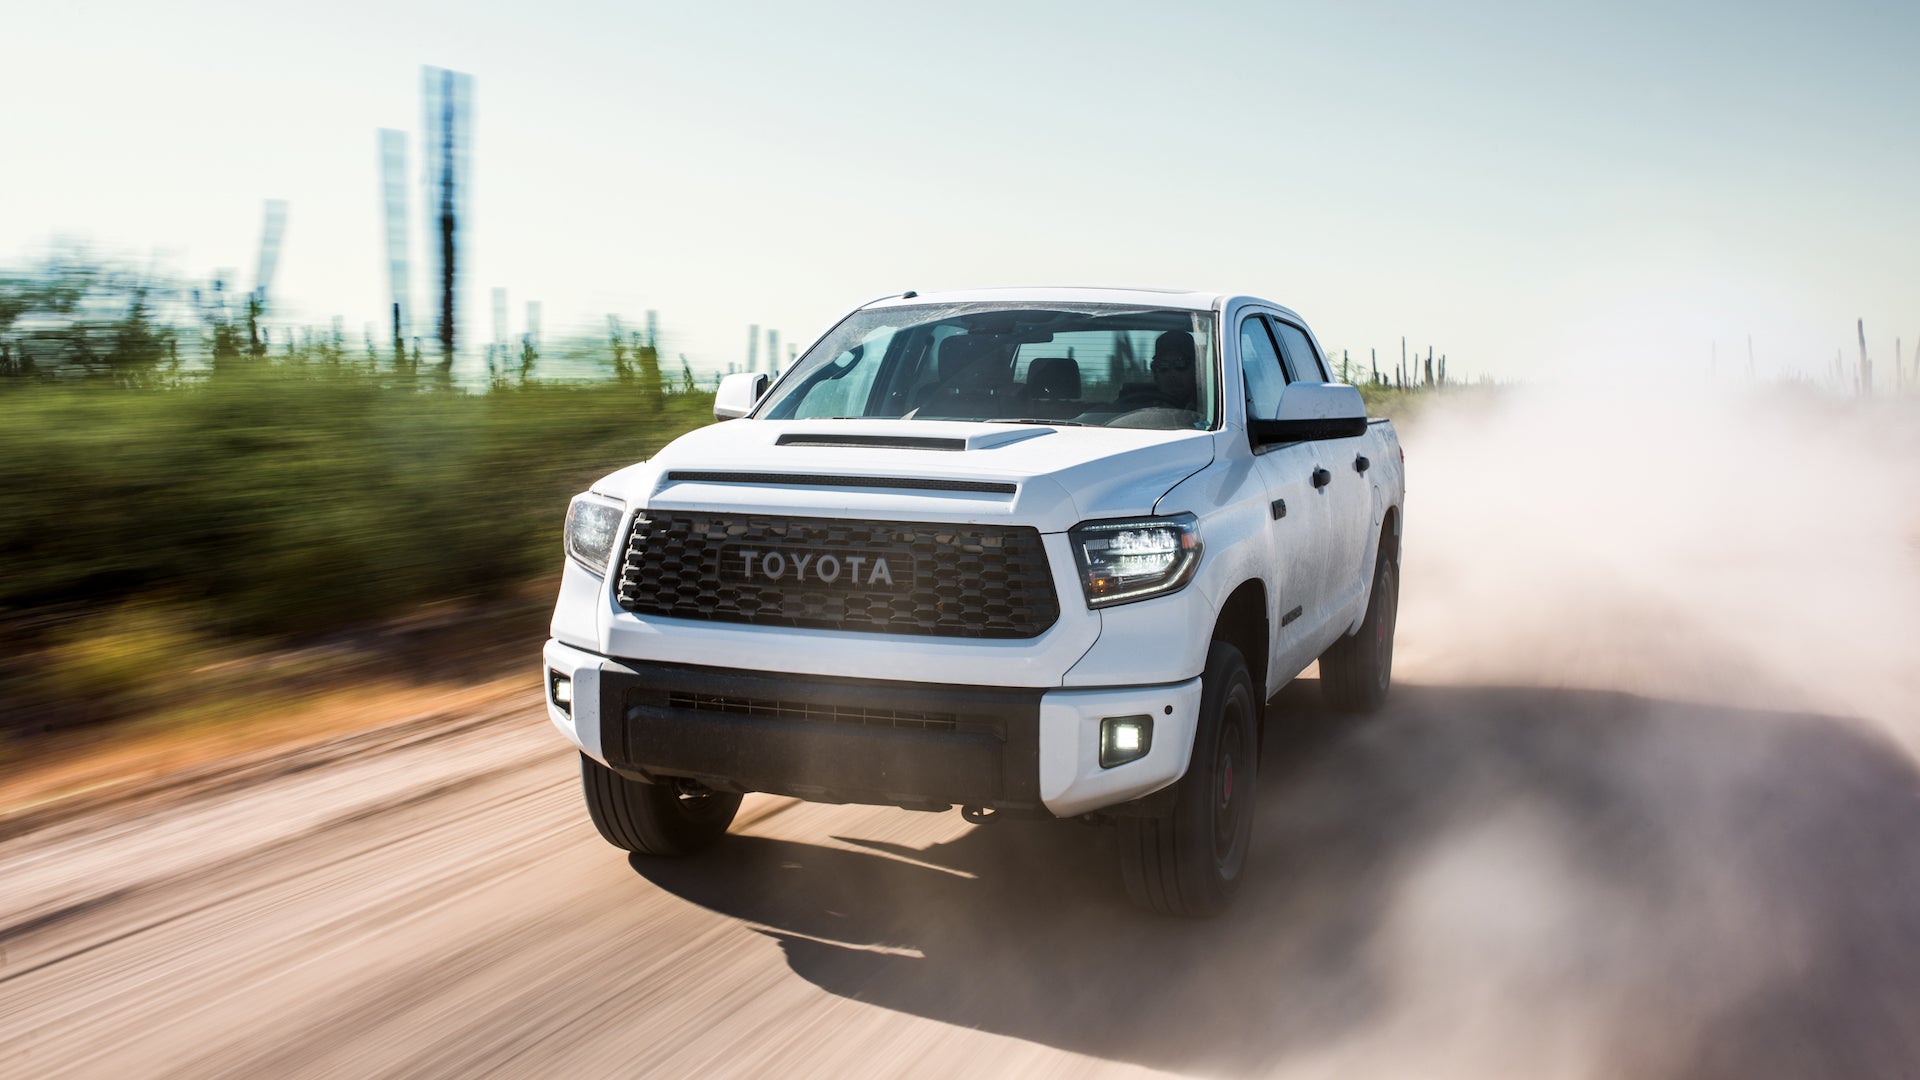 Toyota Confirms New Tundra in Development, Says to ‘Expect Some Big Changes’